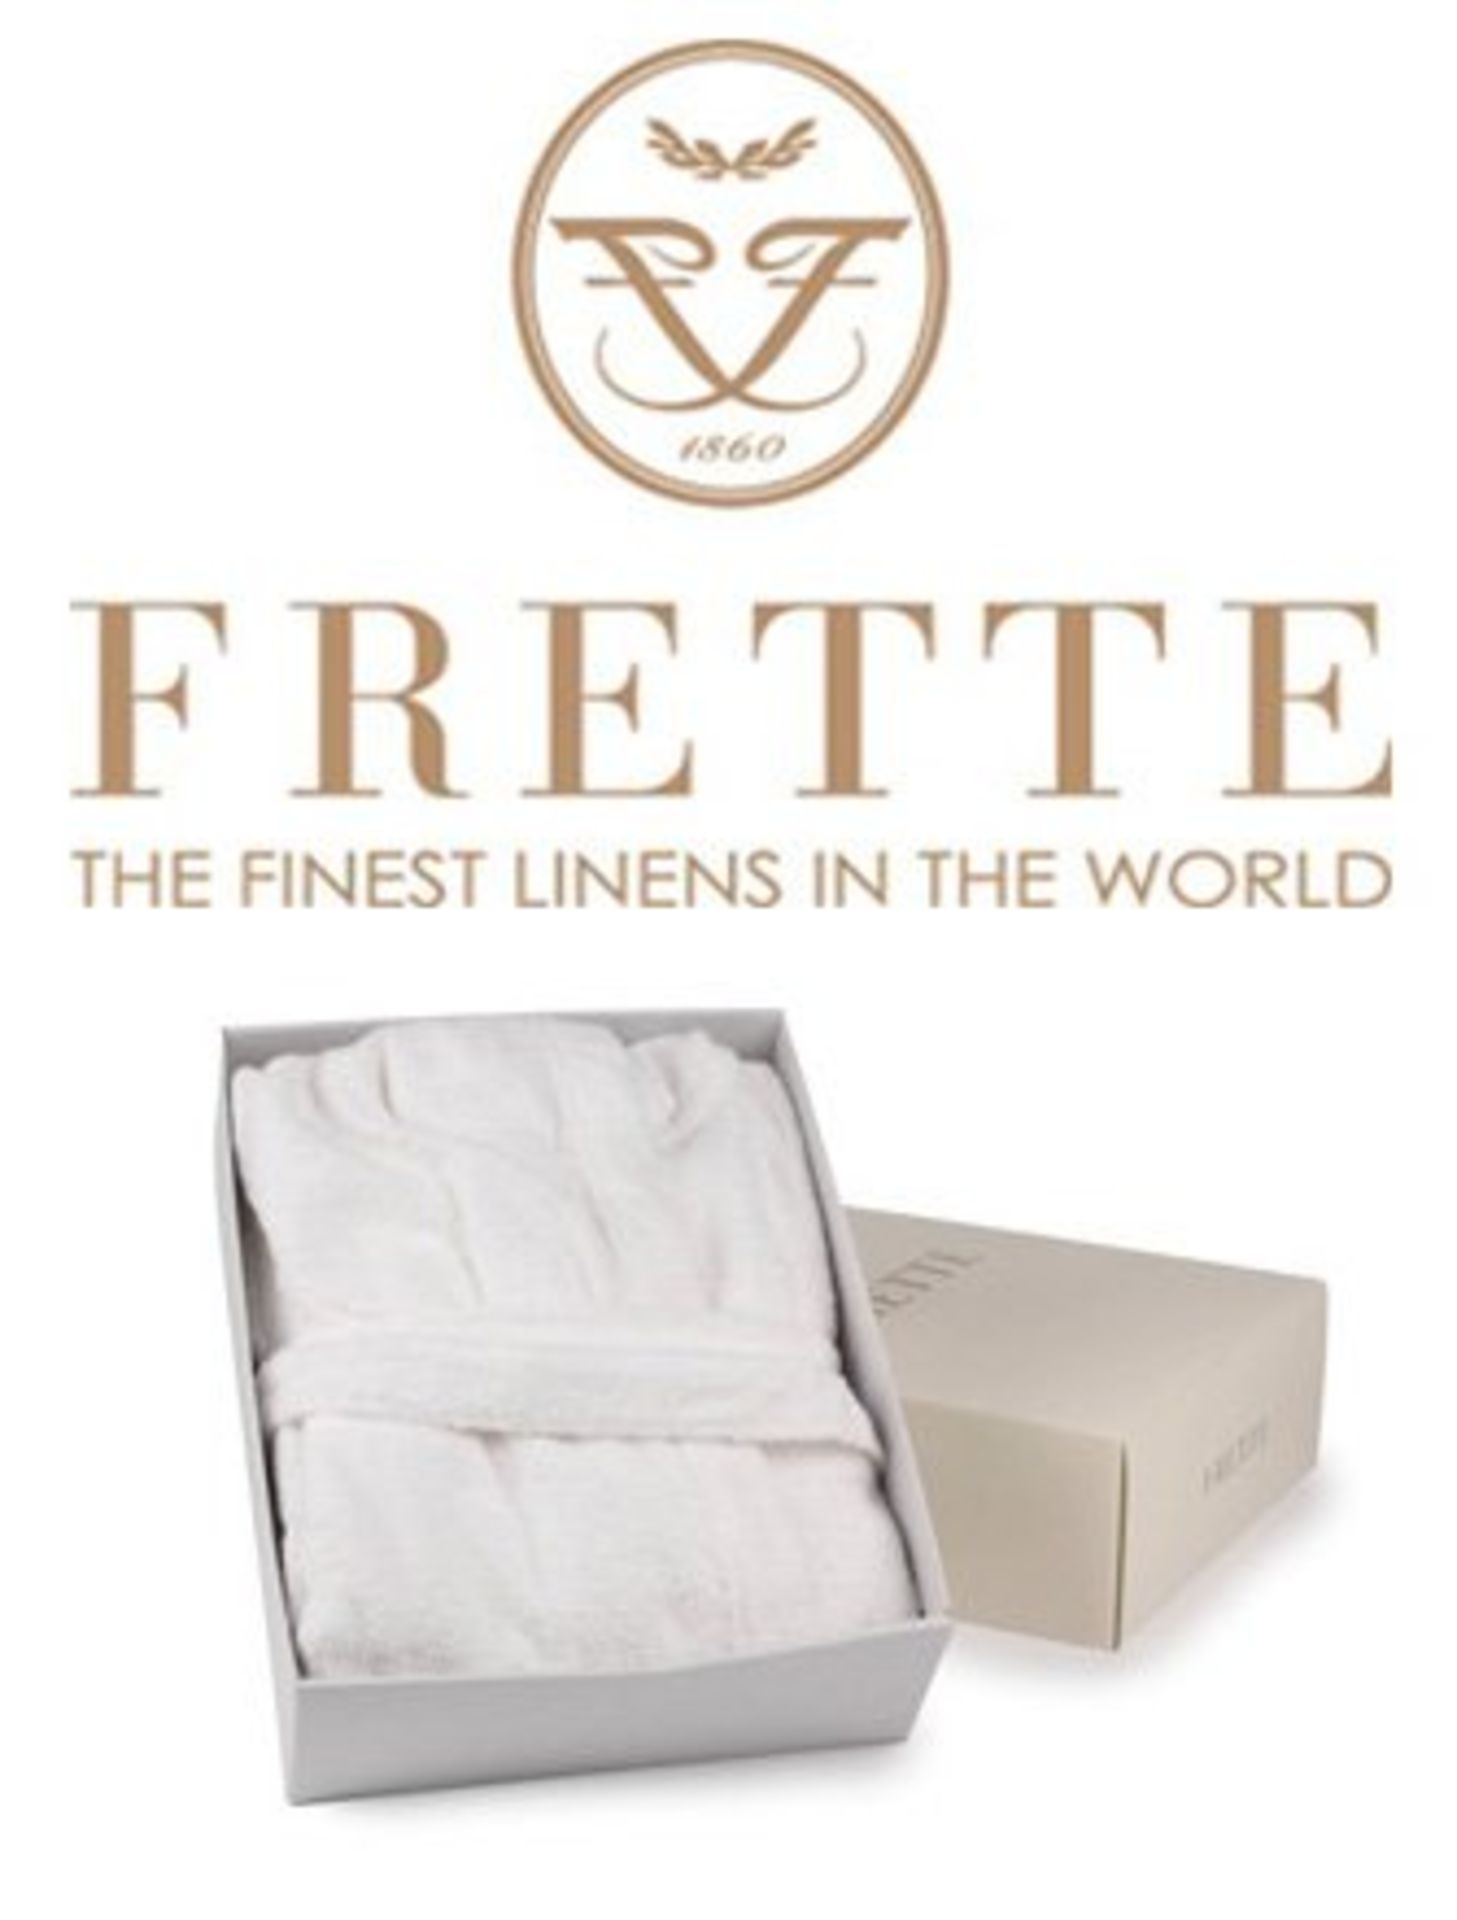 V Brand New Frette Luxury Italian 100% Open Ended High Quality Cotton White Bath Robe with Hood - Image 3 of 3